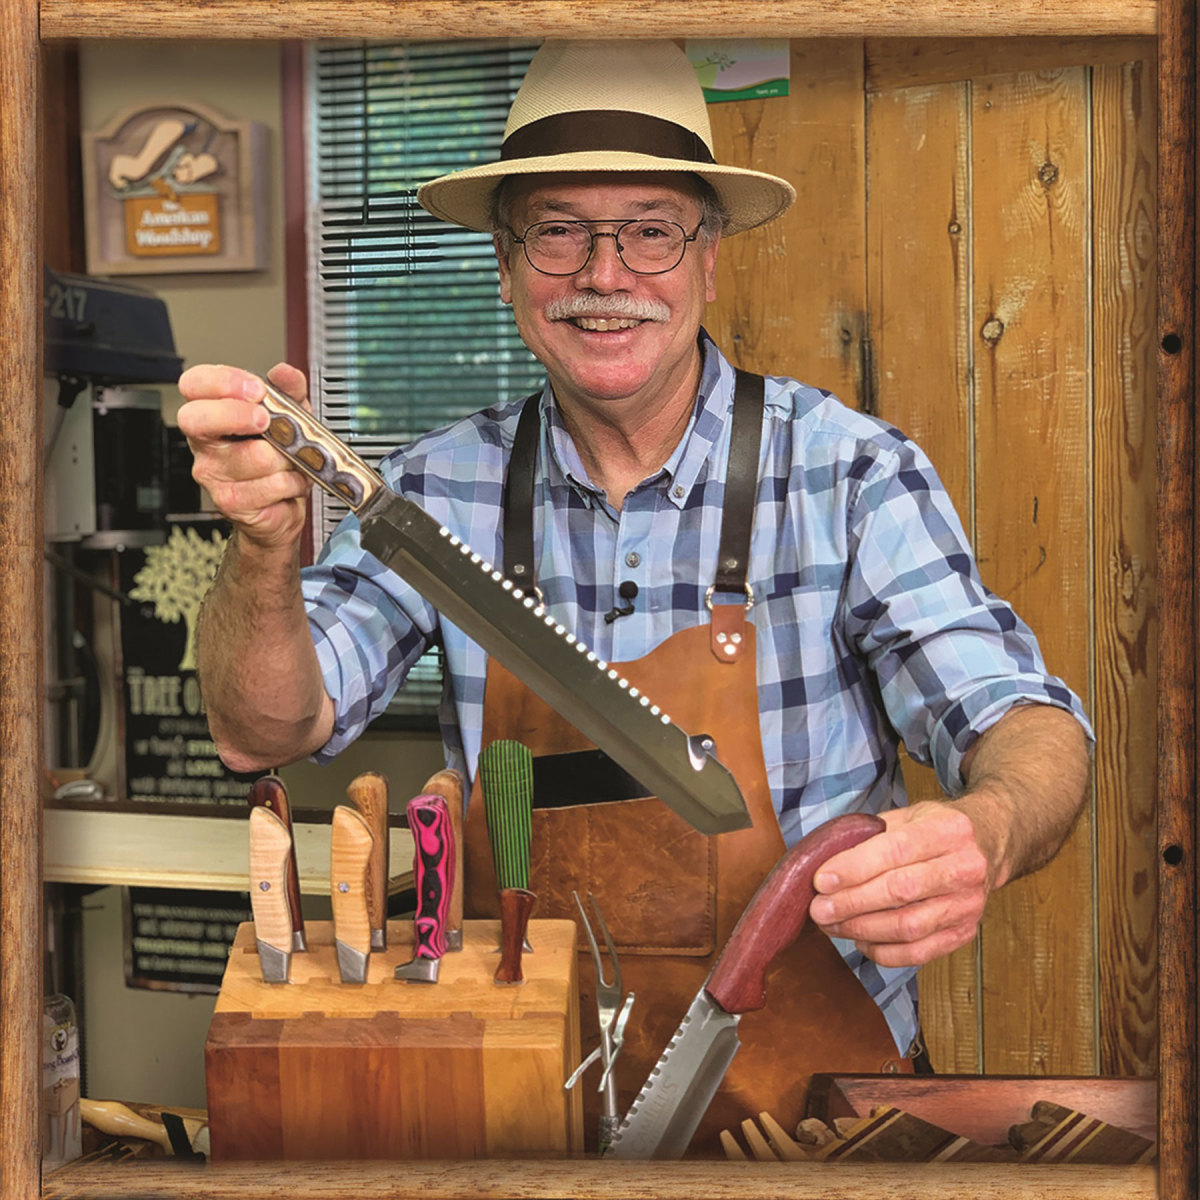 Scott Phillips with a set knives, featuring custom wood handles, made for this season 
of American Woodshop.